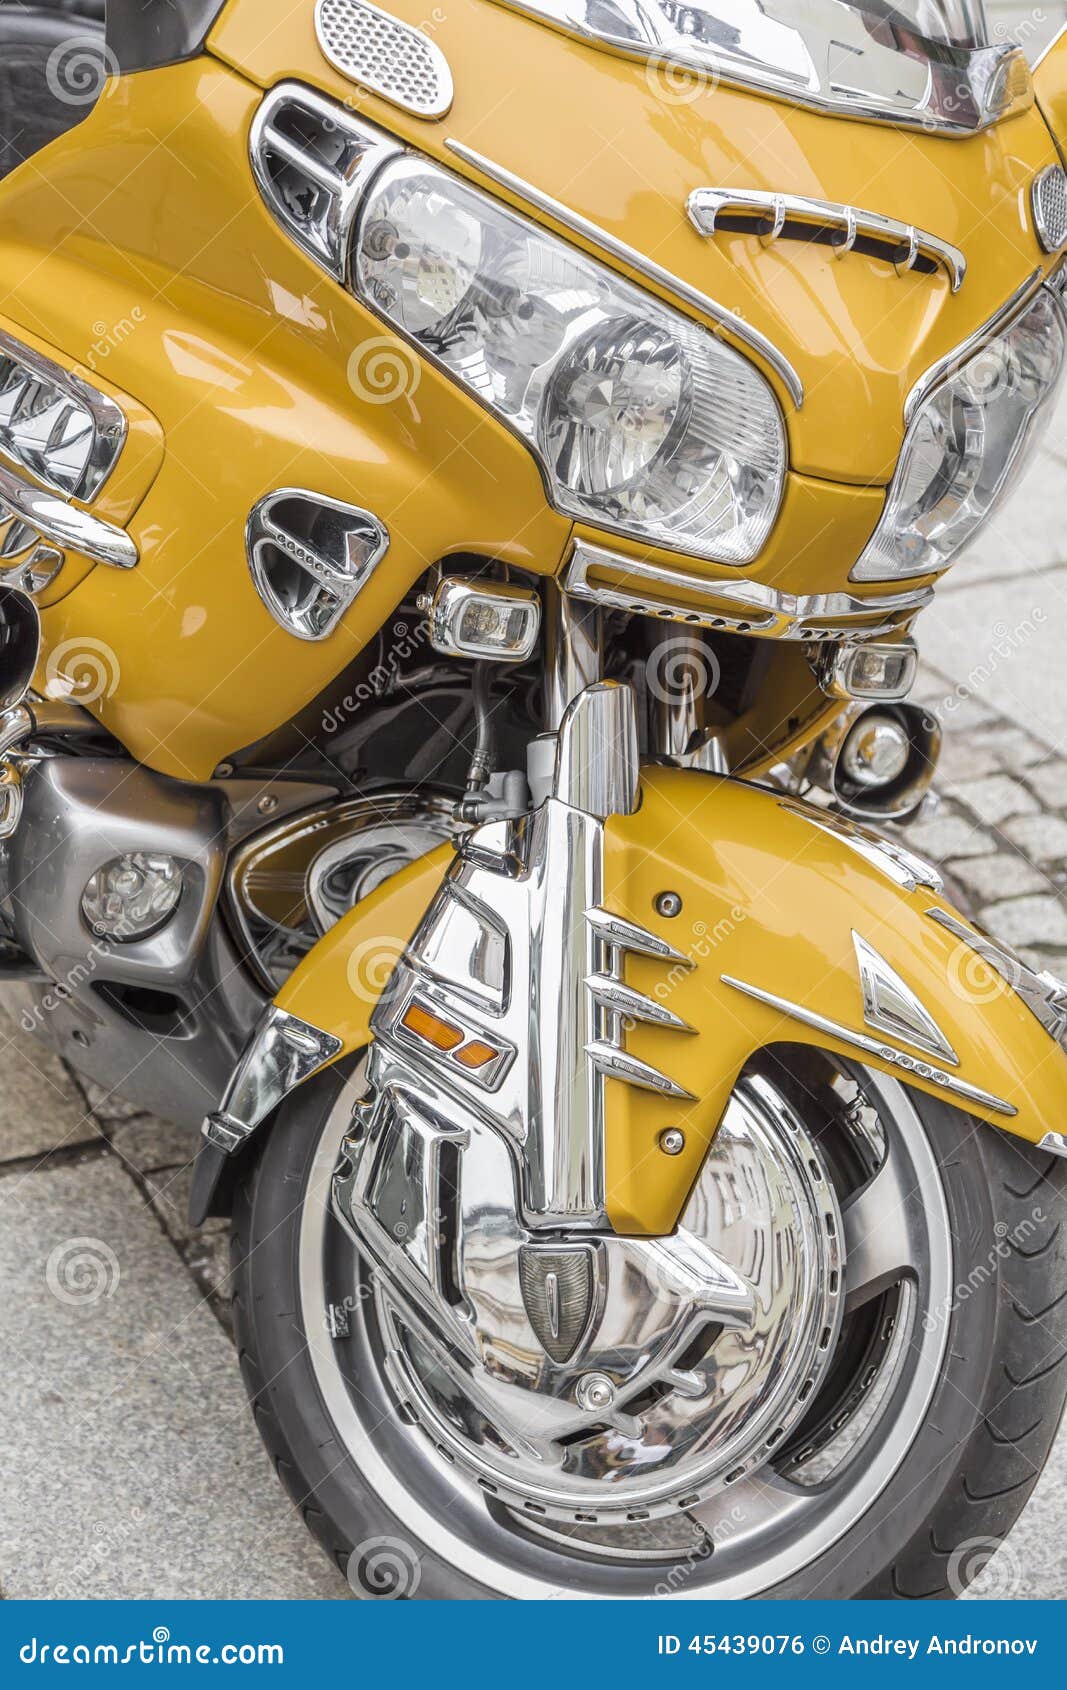 Detail of motorcycle stock photo. Image of vintage, drive - 45439076